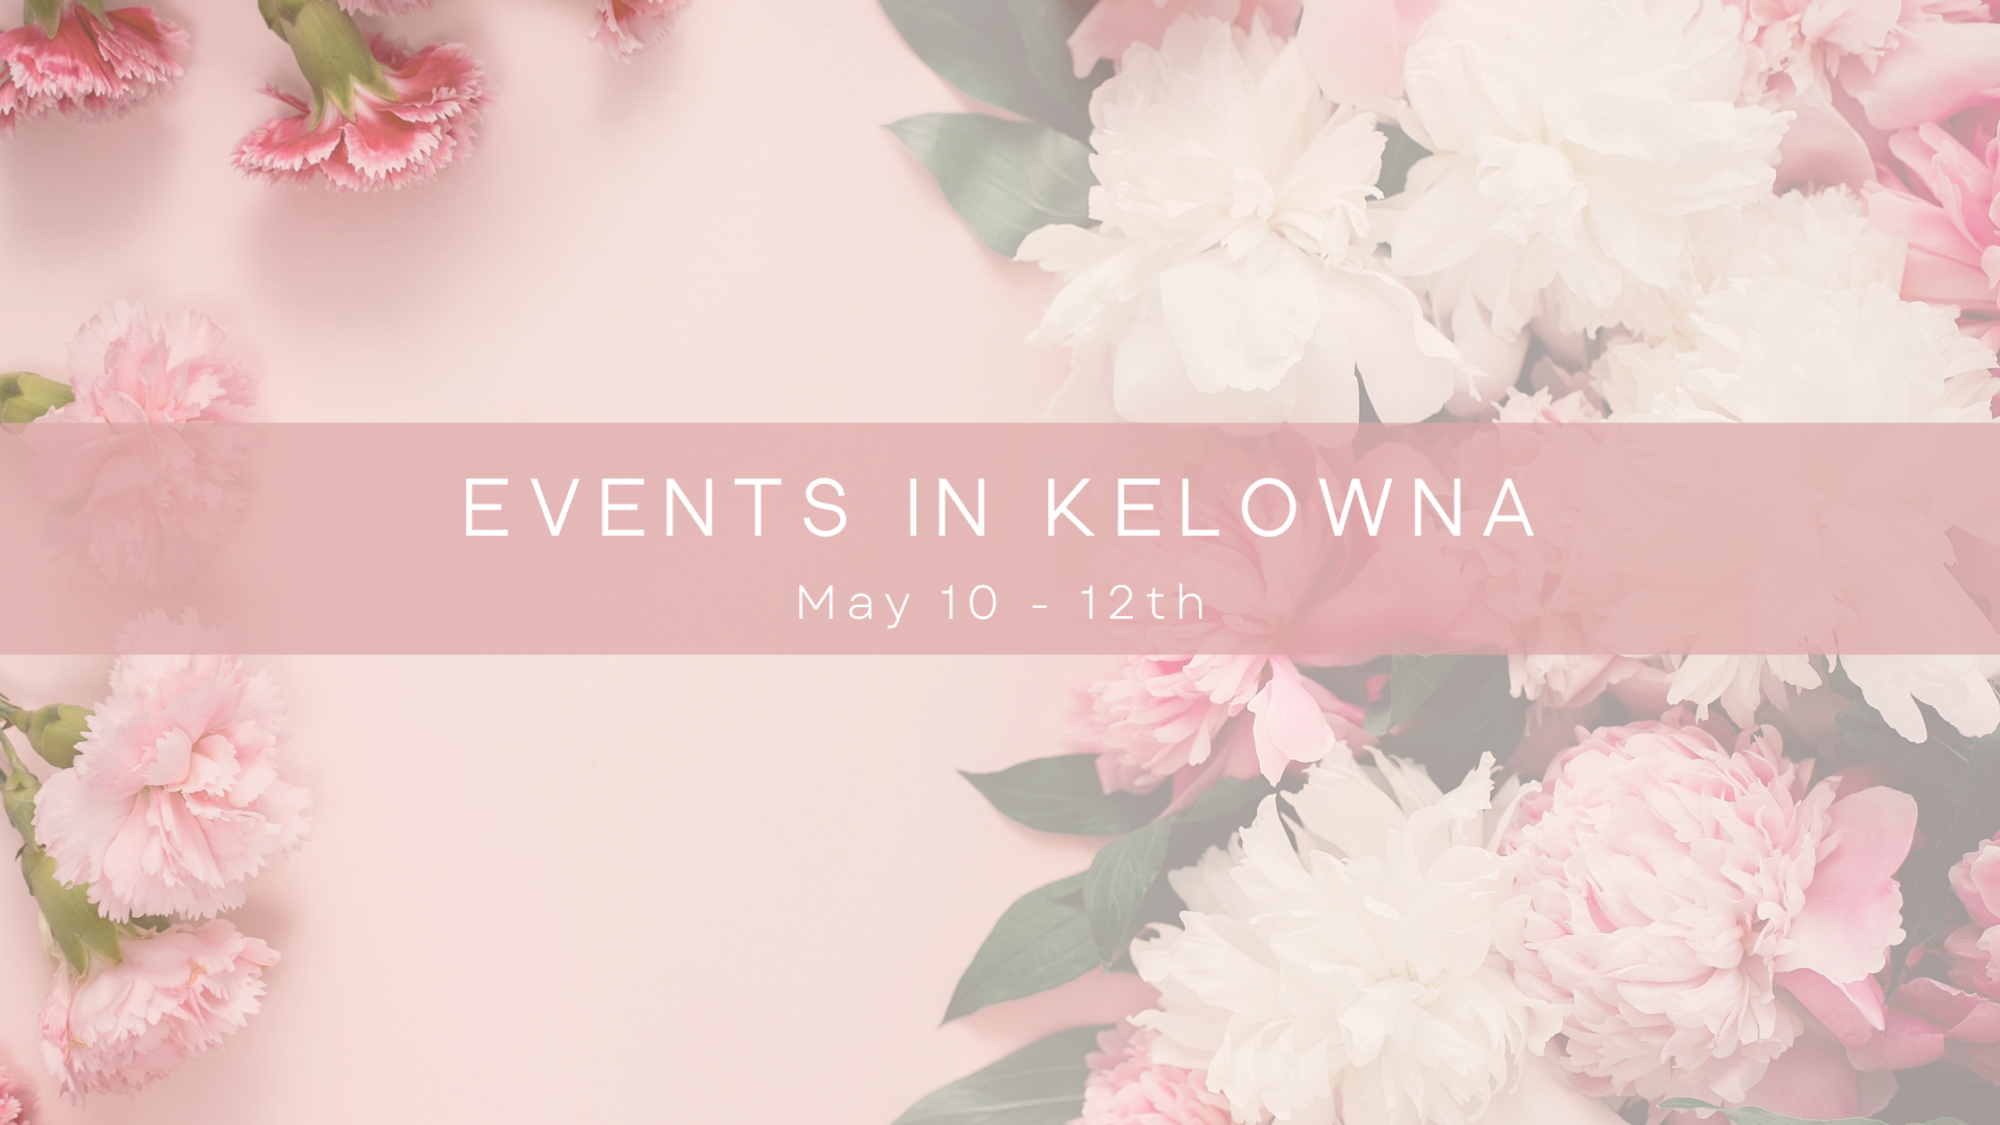 MOTHER’S DAY WEEKEND EVENTS – MAY 10-12TH